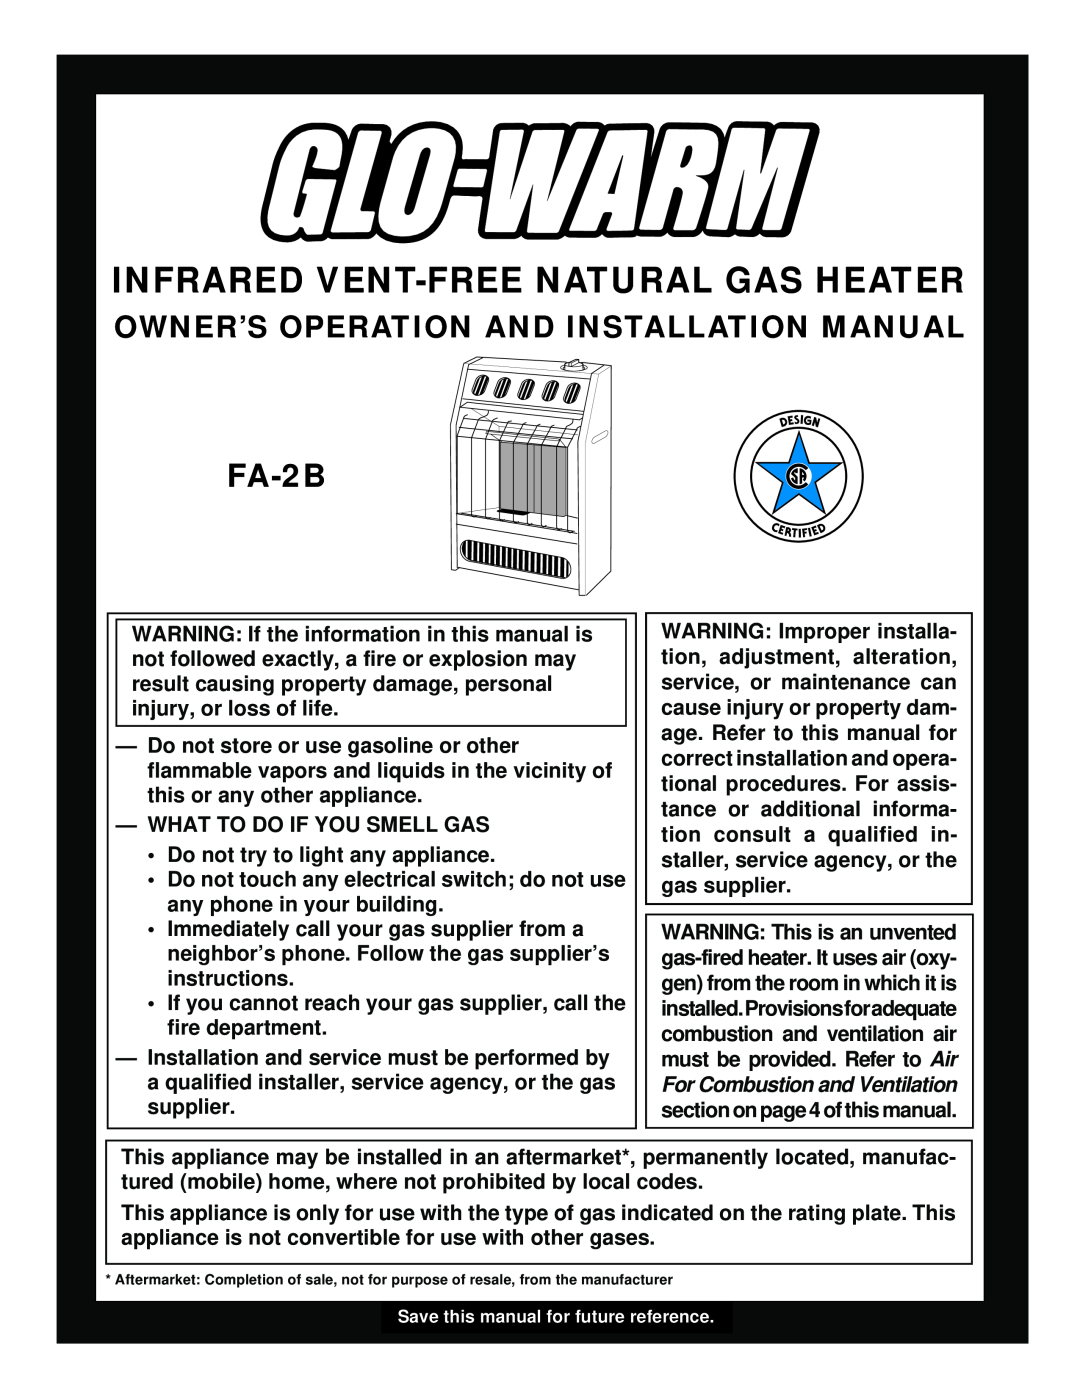 Desa FA-2B installation manual Infrared Vent-Free Natural Gas Heater, Owner’S Operation And Installation Manual 